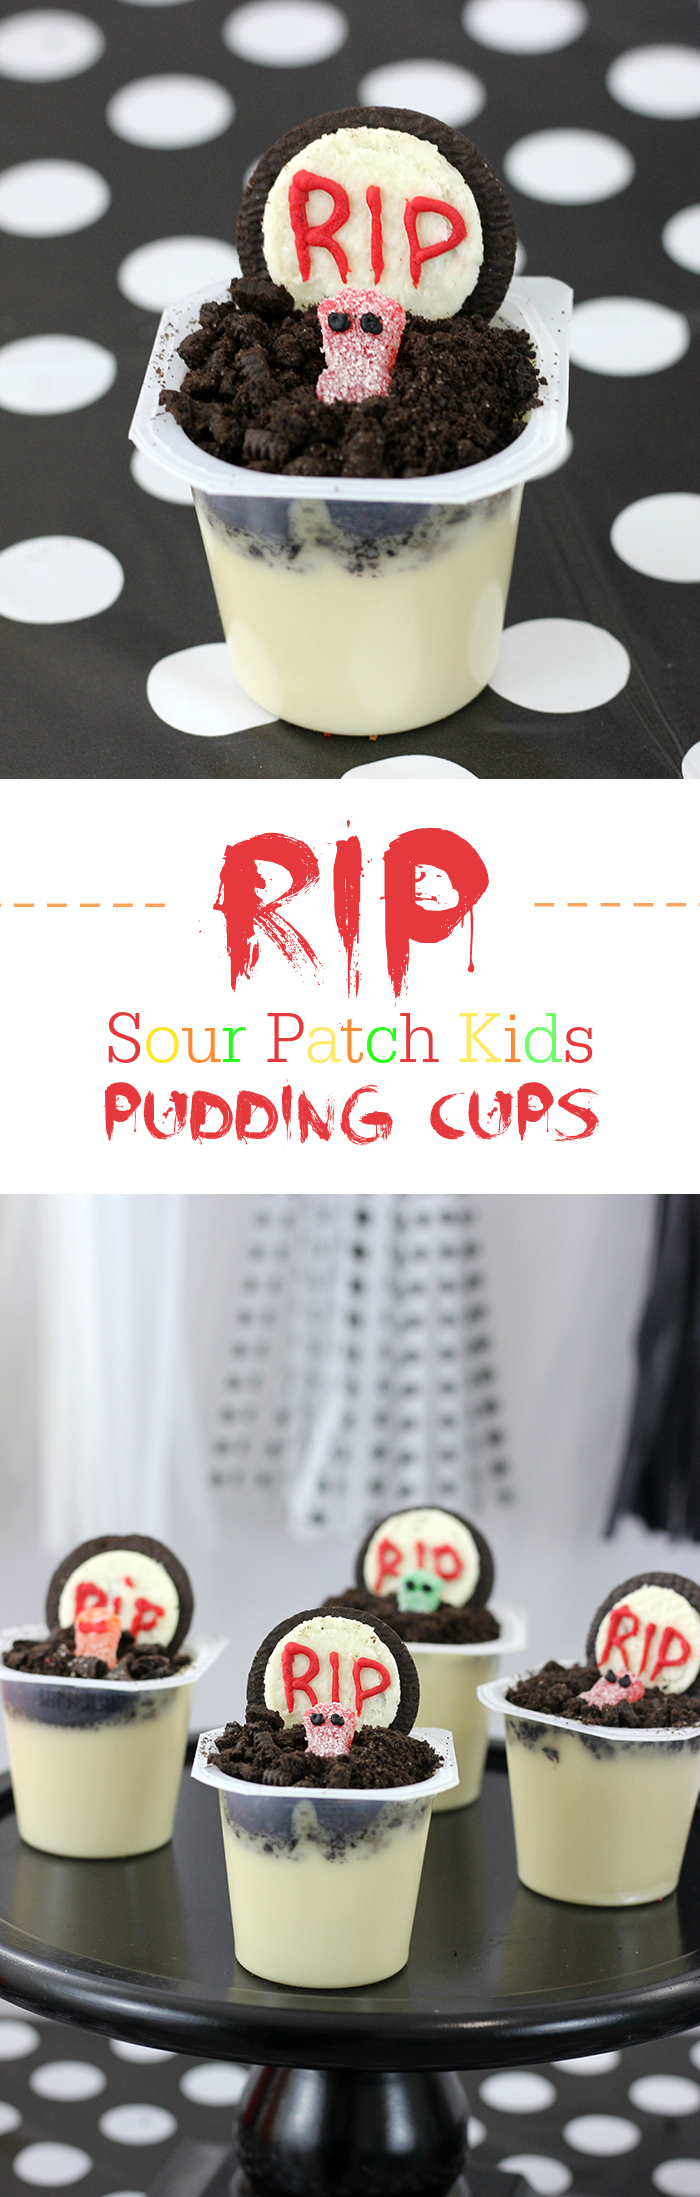 Creepy Halloween Party Treats. From haunted pudding cups, to blood spattered OREO cookies and more. Make Dead Sea Pudding Cups with OREO, Sour Patch Kids and Snack Pack Pudding Cups.